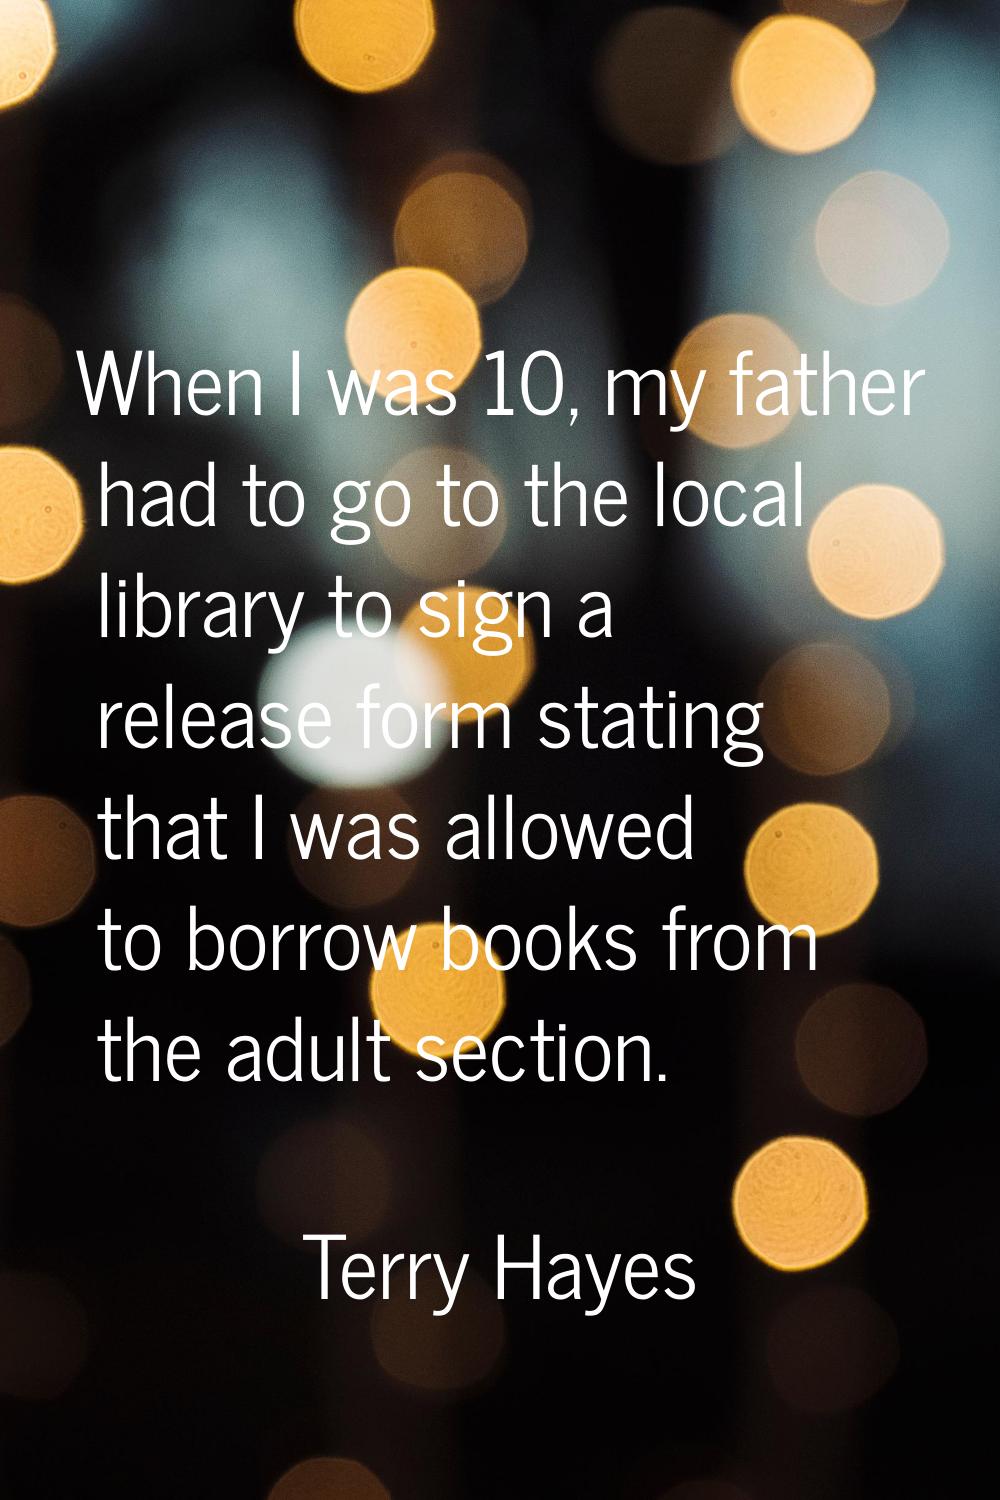 When I was 10, my father had to go to the local library to sign a release form stating that I was a